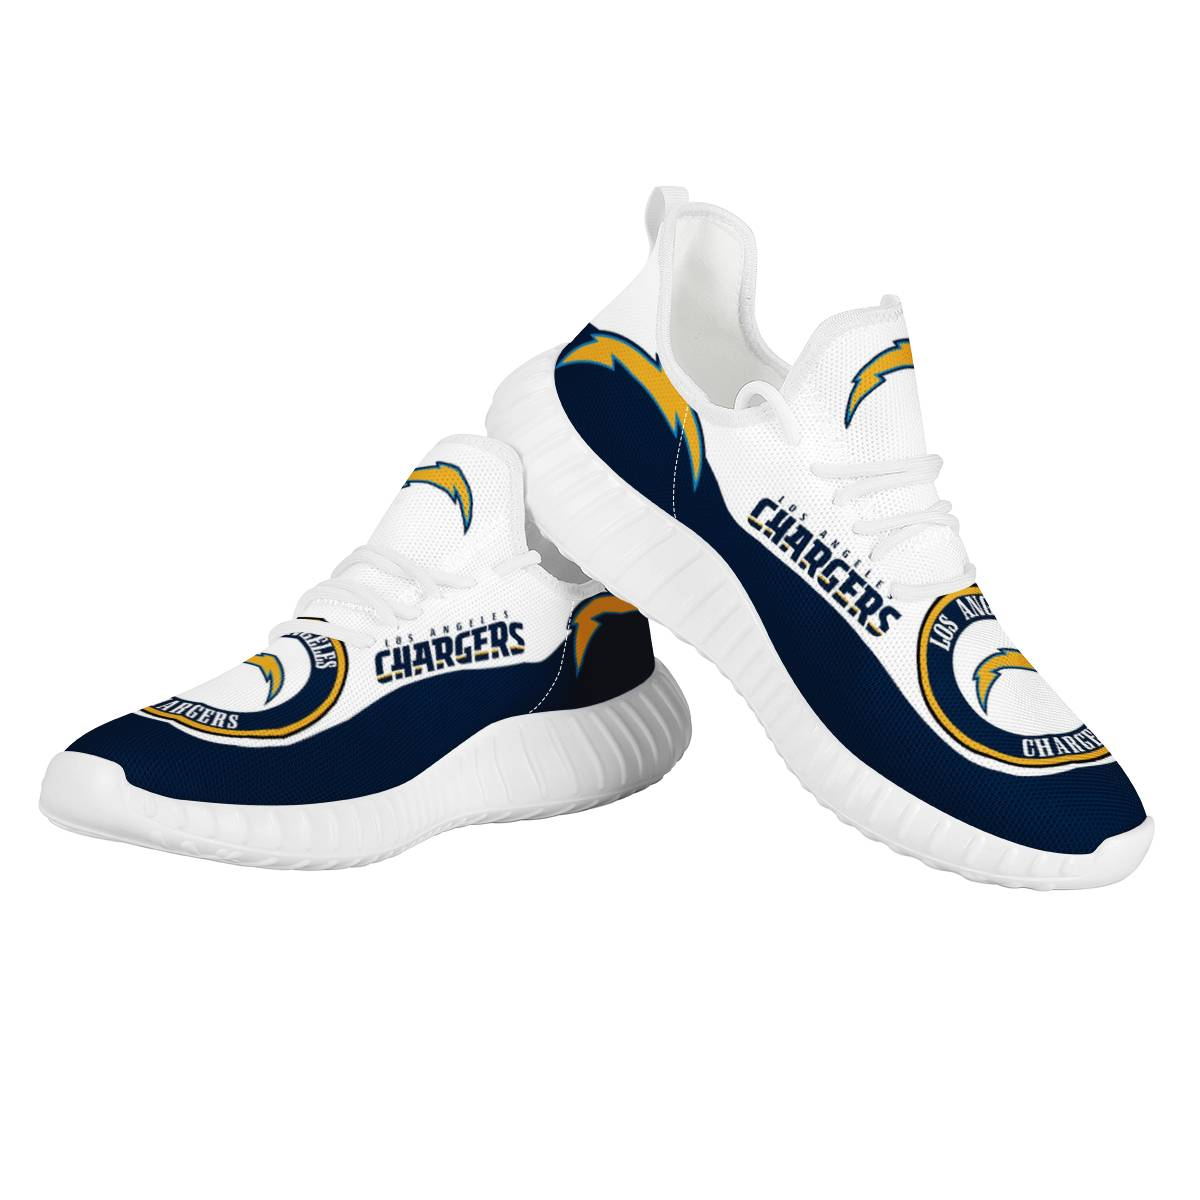 Men's NFL Los Angeles Chargers Mesh Knit Sneakers/Shoes 002